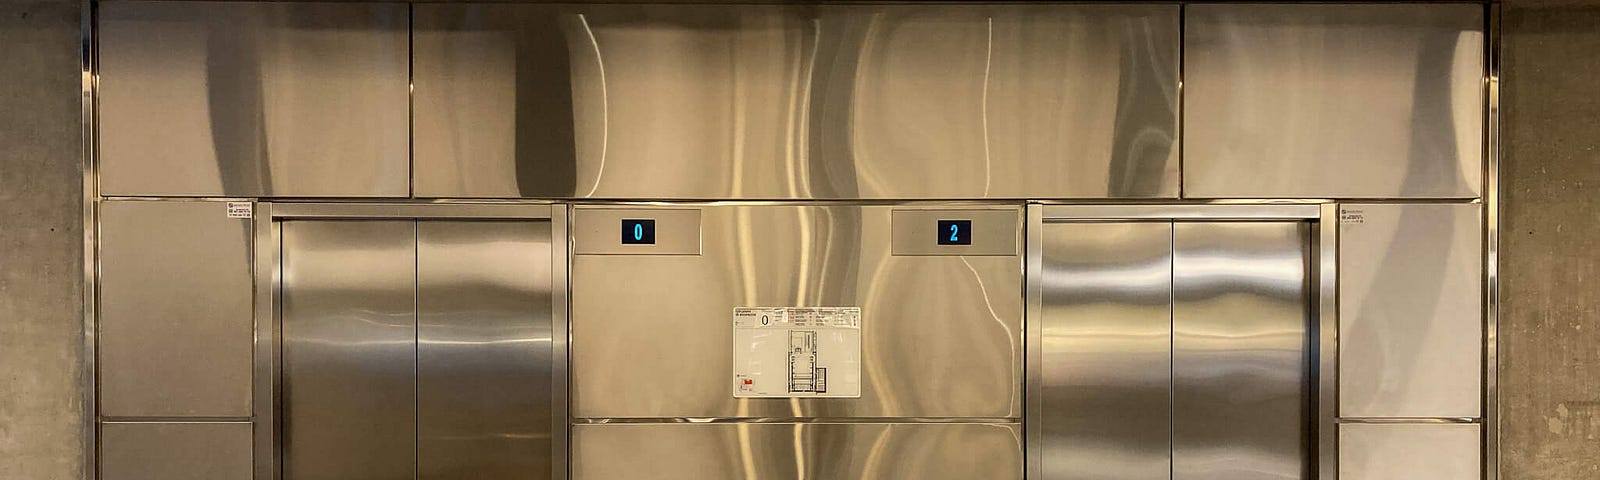 Two stainless steel elevator doors on a shiny metal wall